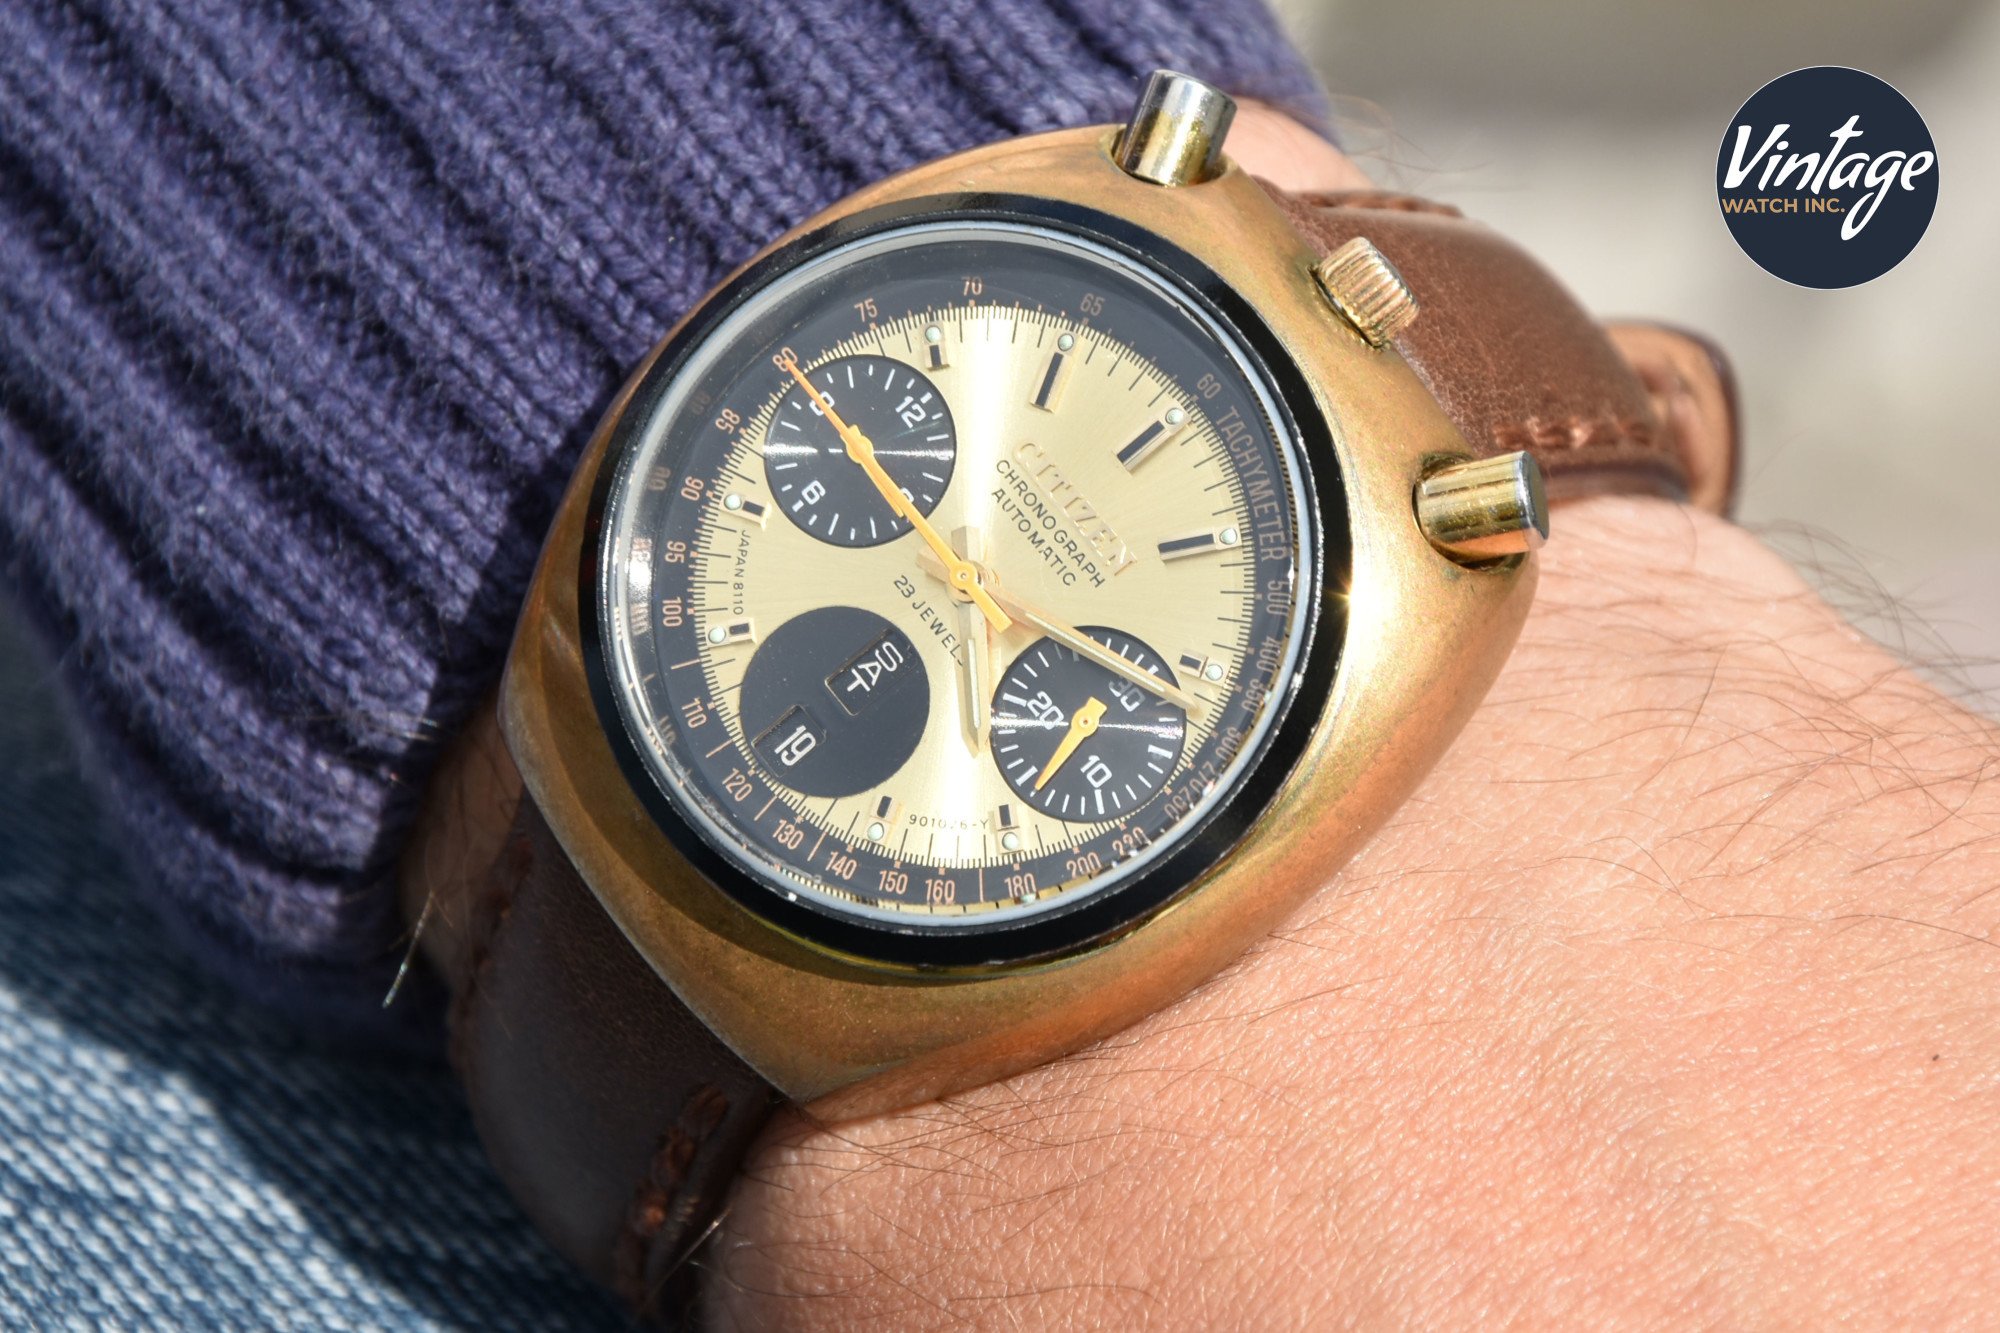 Vintage Citizen Watches: History & Iconic Models | Vintage Watch Inc